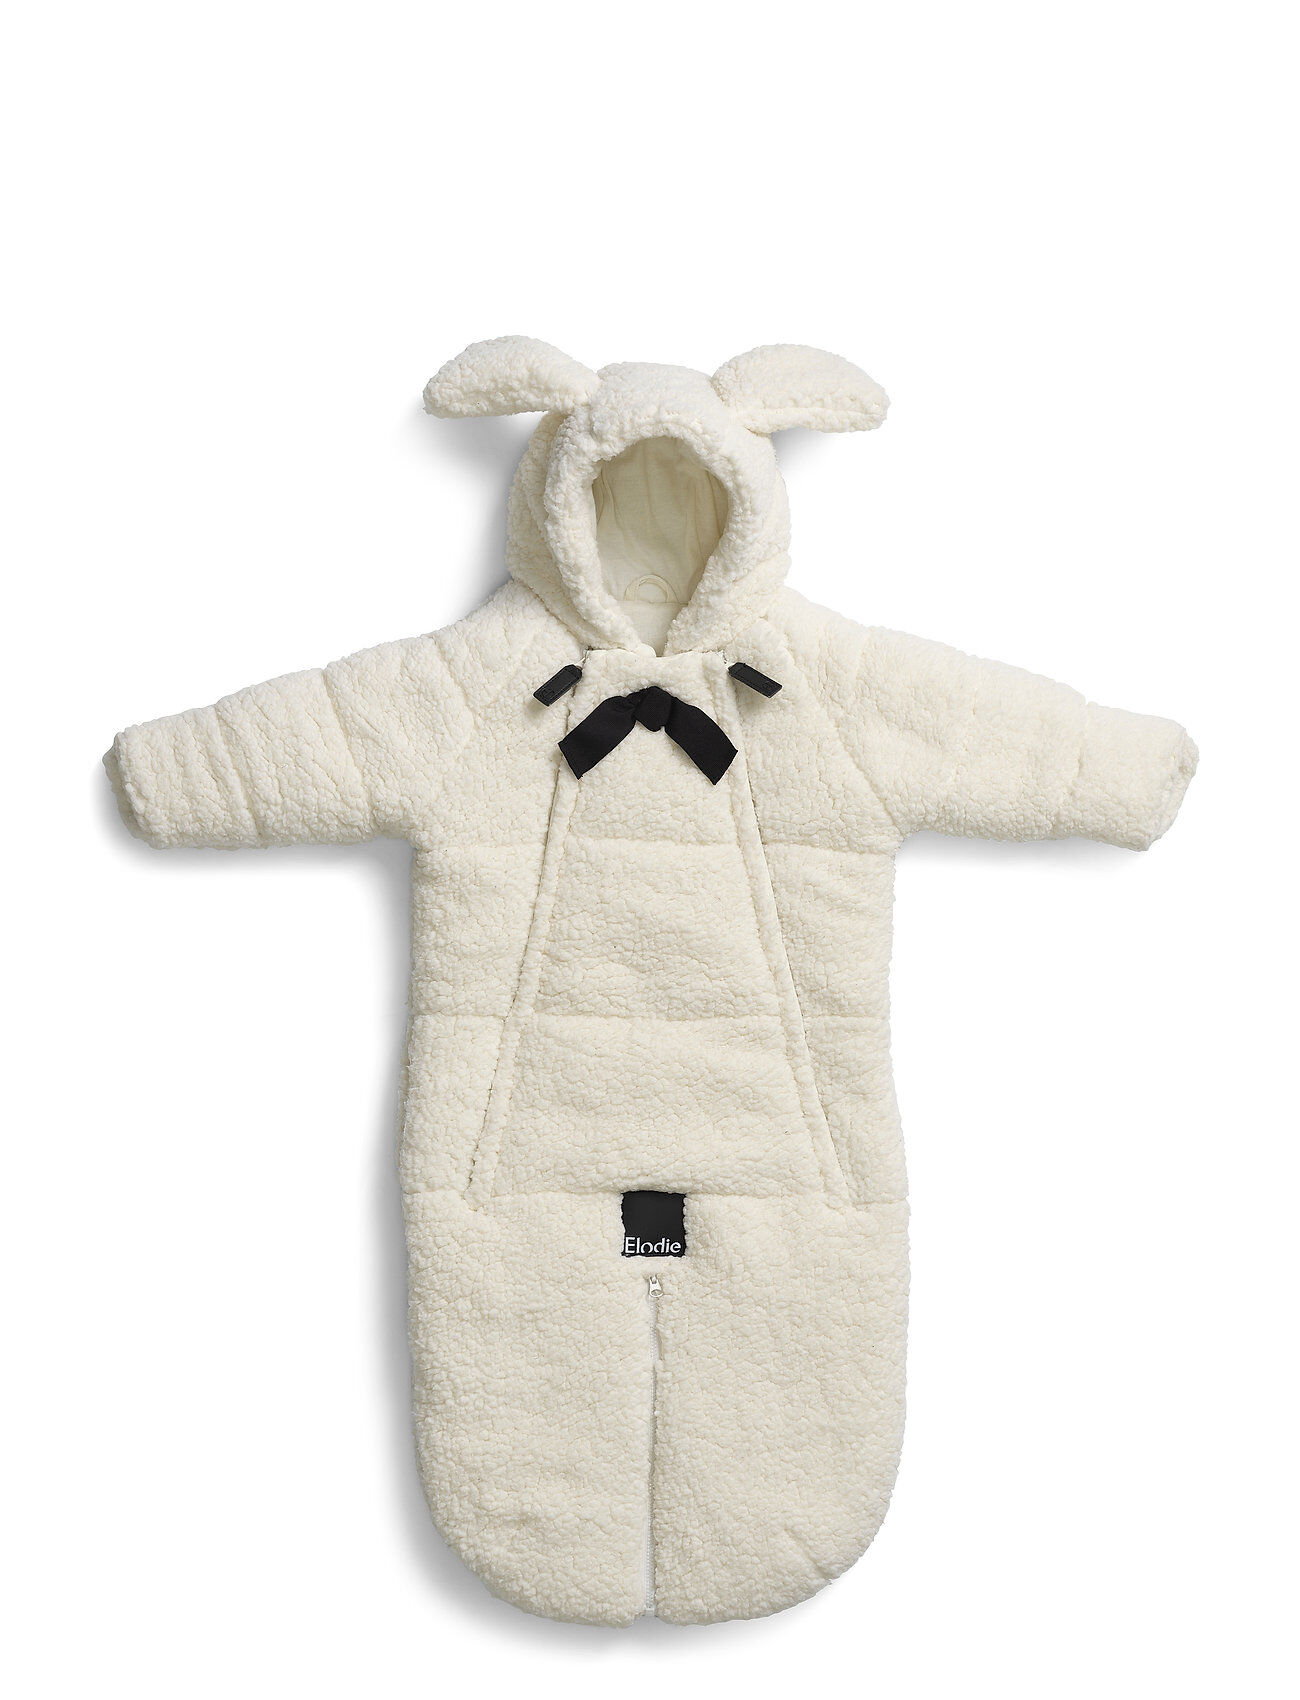 Elodie Details Baby Overall - Shearling Baby & Maternity Strollers & Accessories Footmuffs Hvit Elodie Details